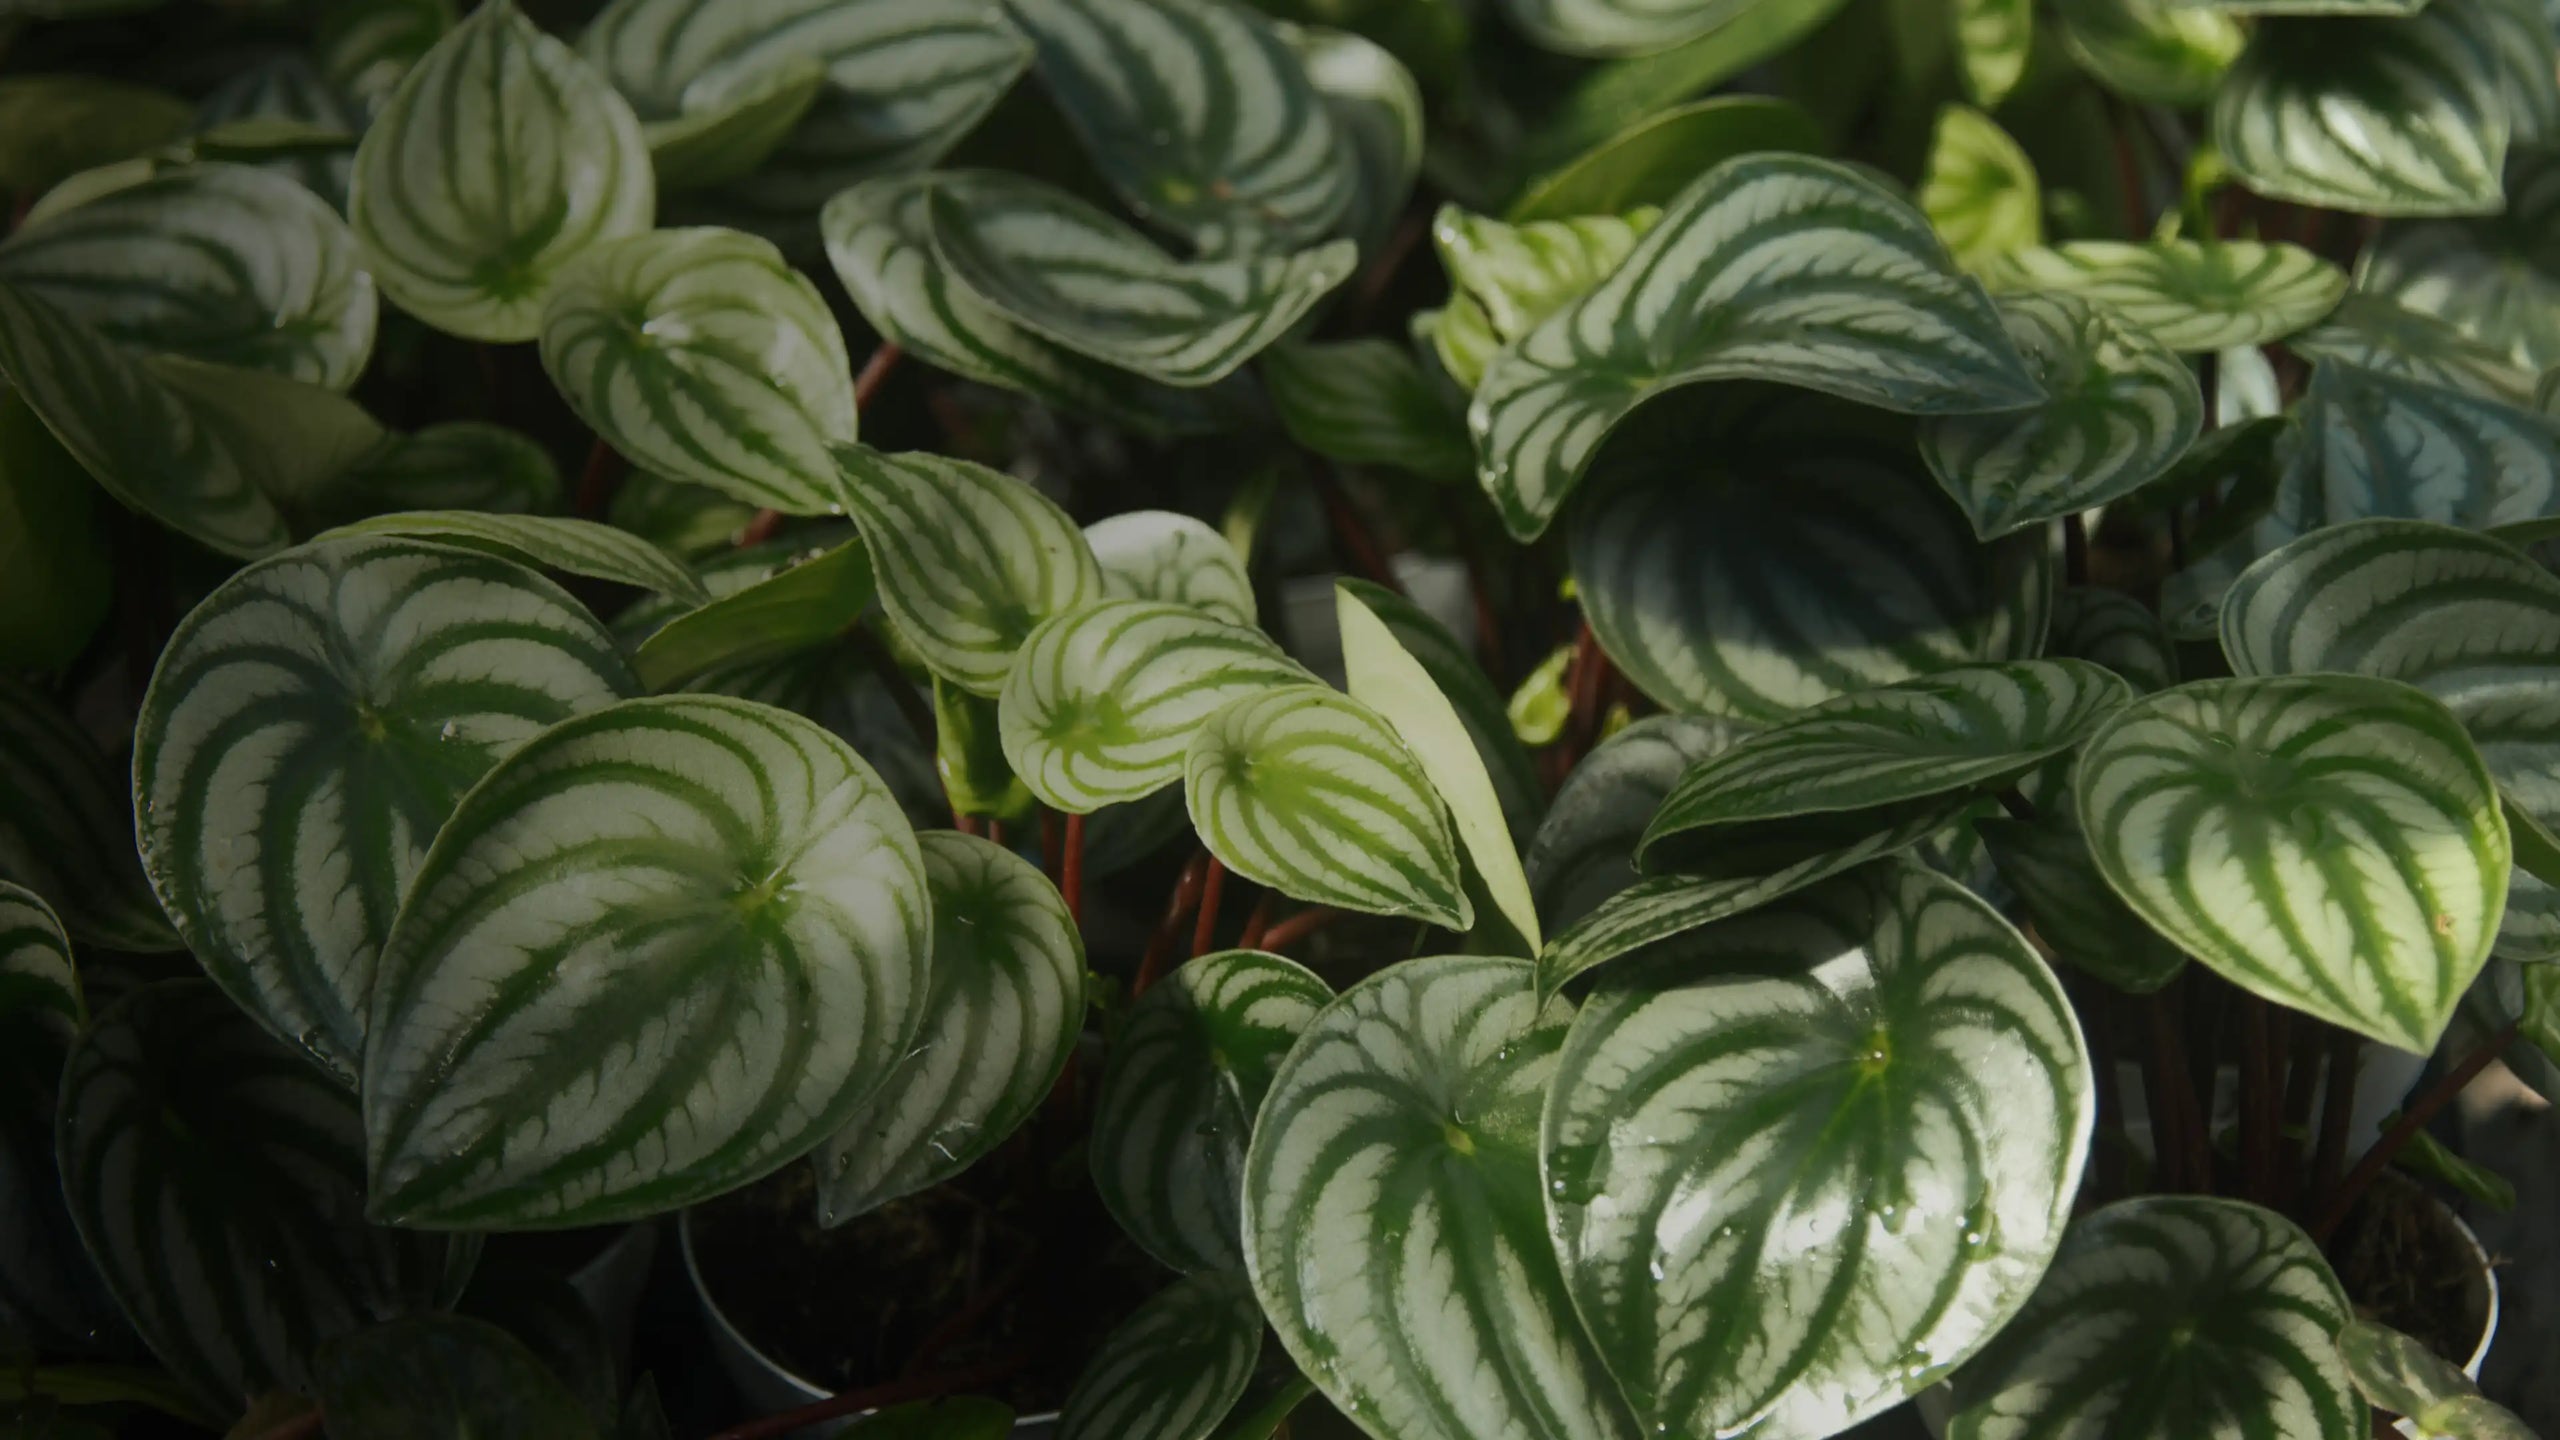 A close up photo of a Peperomia